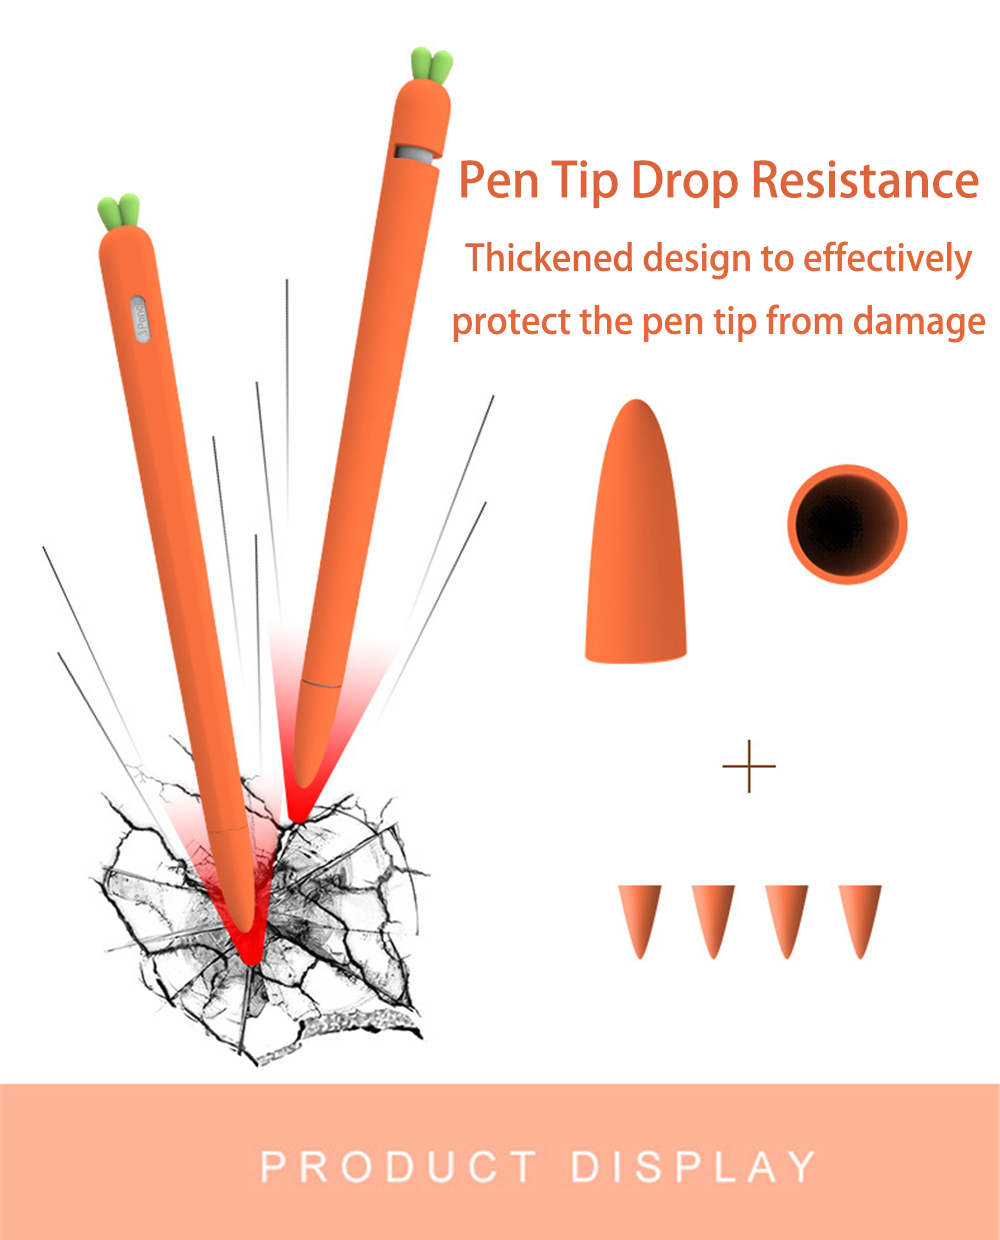 Carrot-Soft-Silicone-Protective-Pen-Case-Sleeve-Tablet-Touch-Pen-Stylus-Pencil-Case-Anti-lost-For-Ap-1734947-7